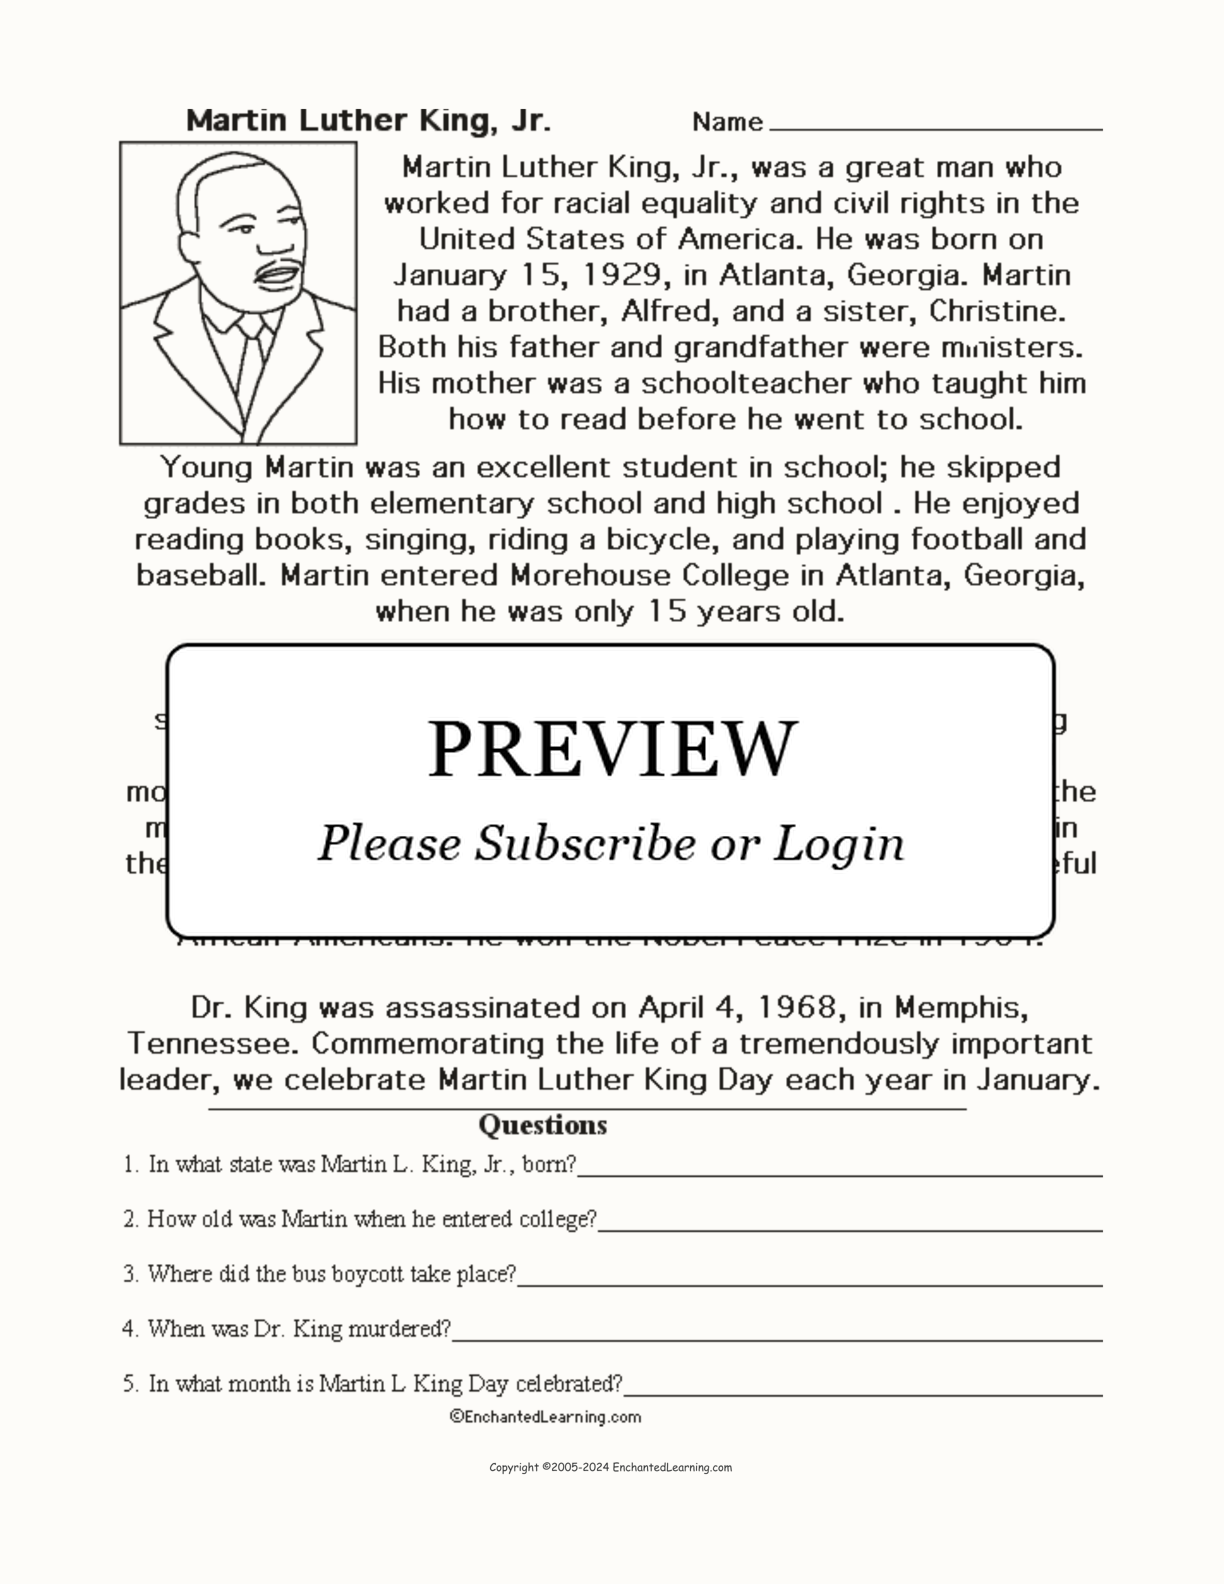 Martin Luther King, Jr., Biography (with Questions) interactive worksheet page 1